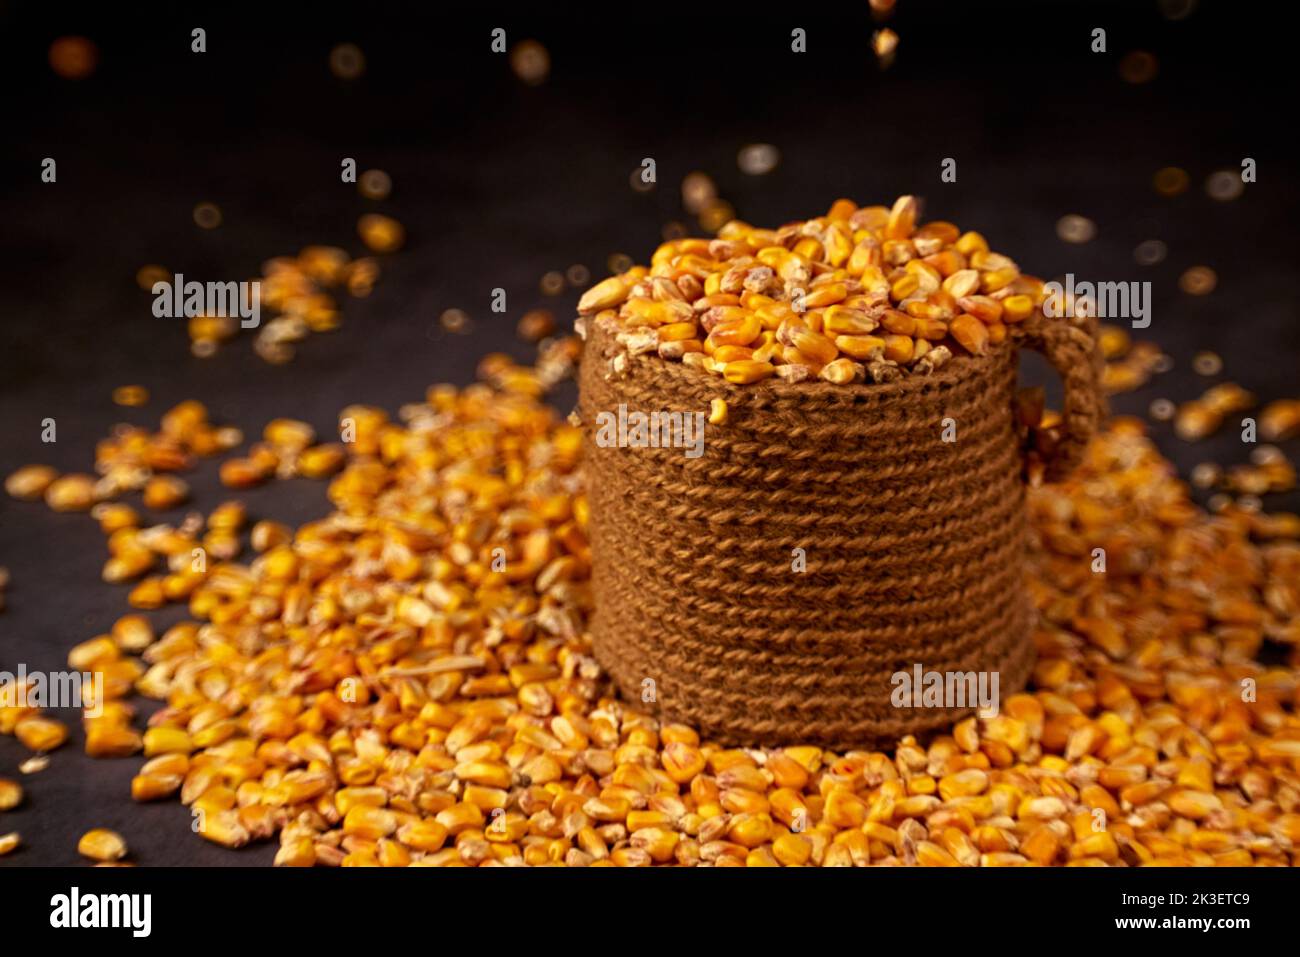 Corn grains in a jute bag and scattered grains around on a dark background Stock Photo